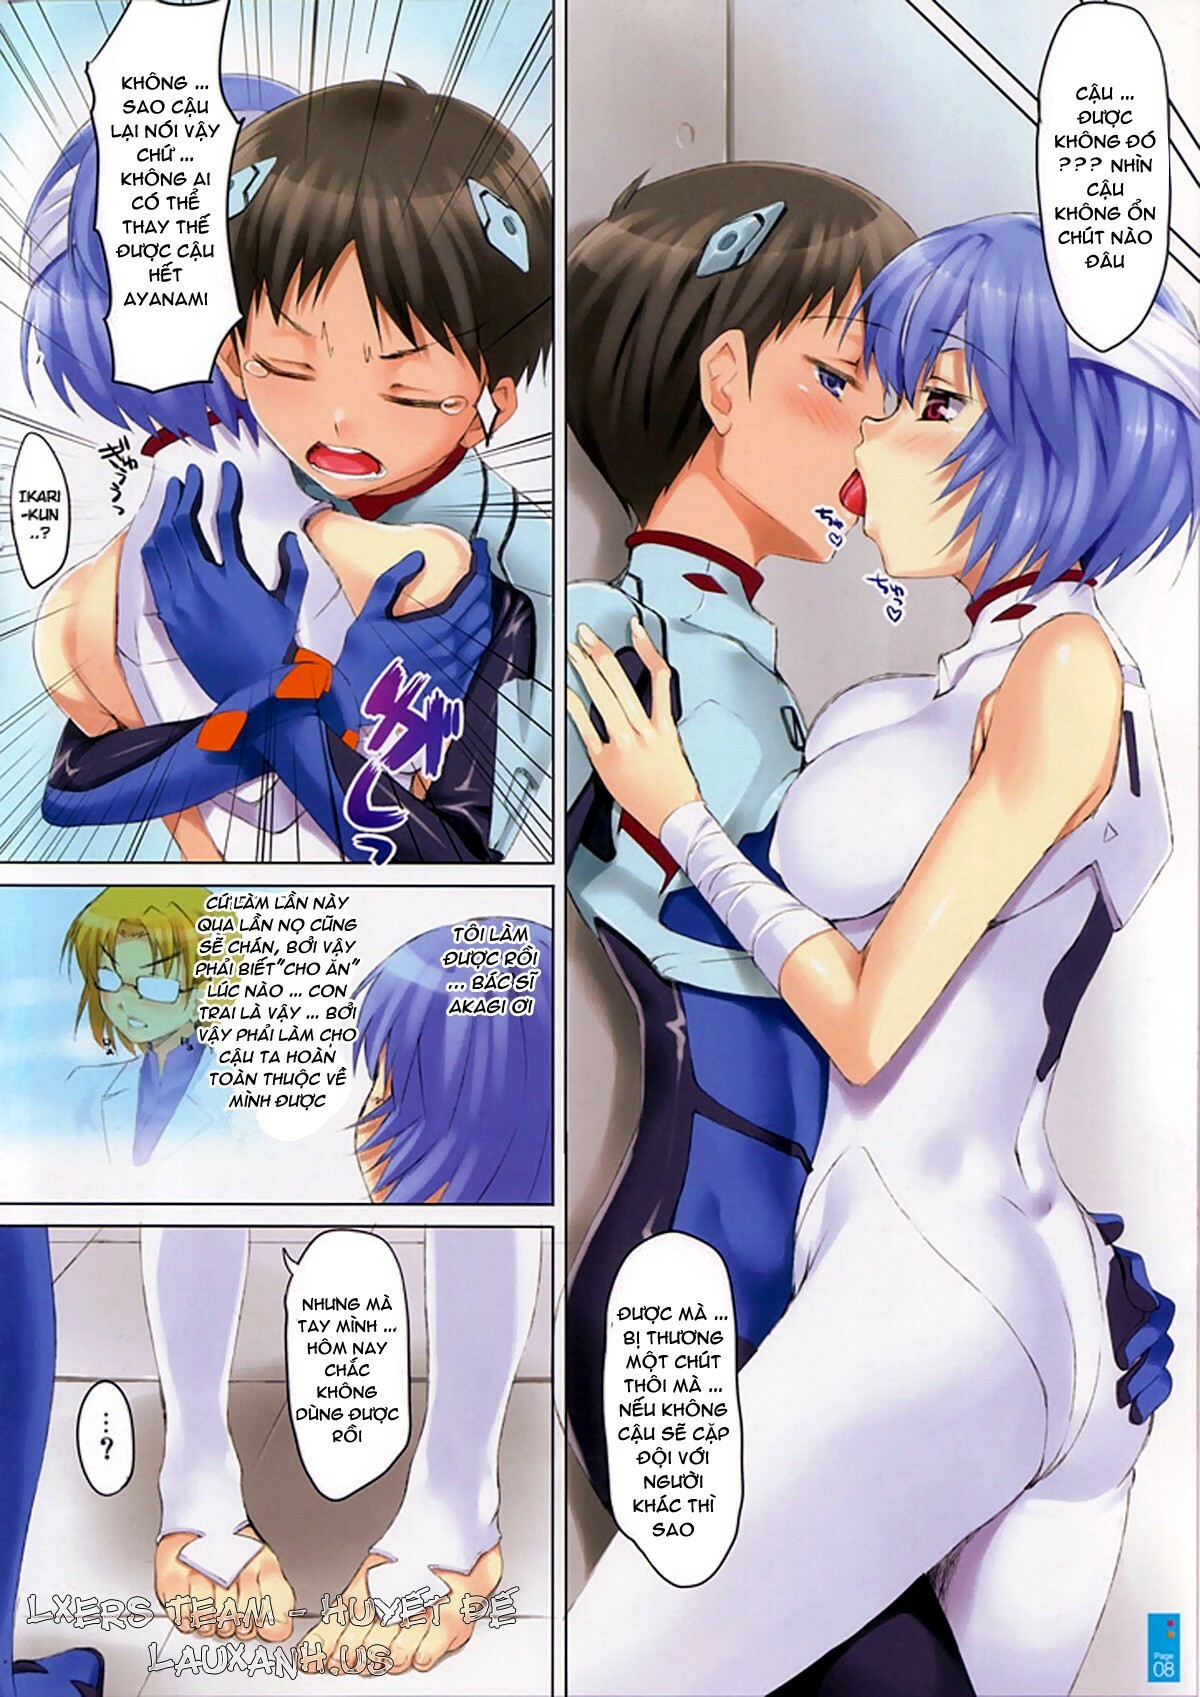 (SC48) [Clesta (Cle Masahiro)] CL-orz: 10.0 - you can (not) advance (Rebuild of Evangelion) [Vietnamese Tiếng Việt] [Decensored] page 8 full